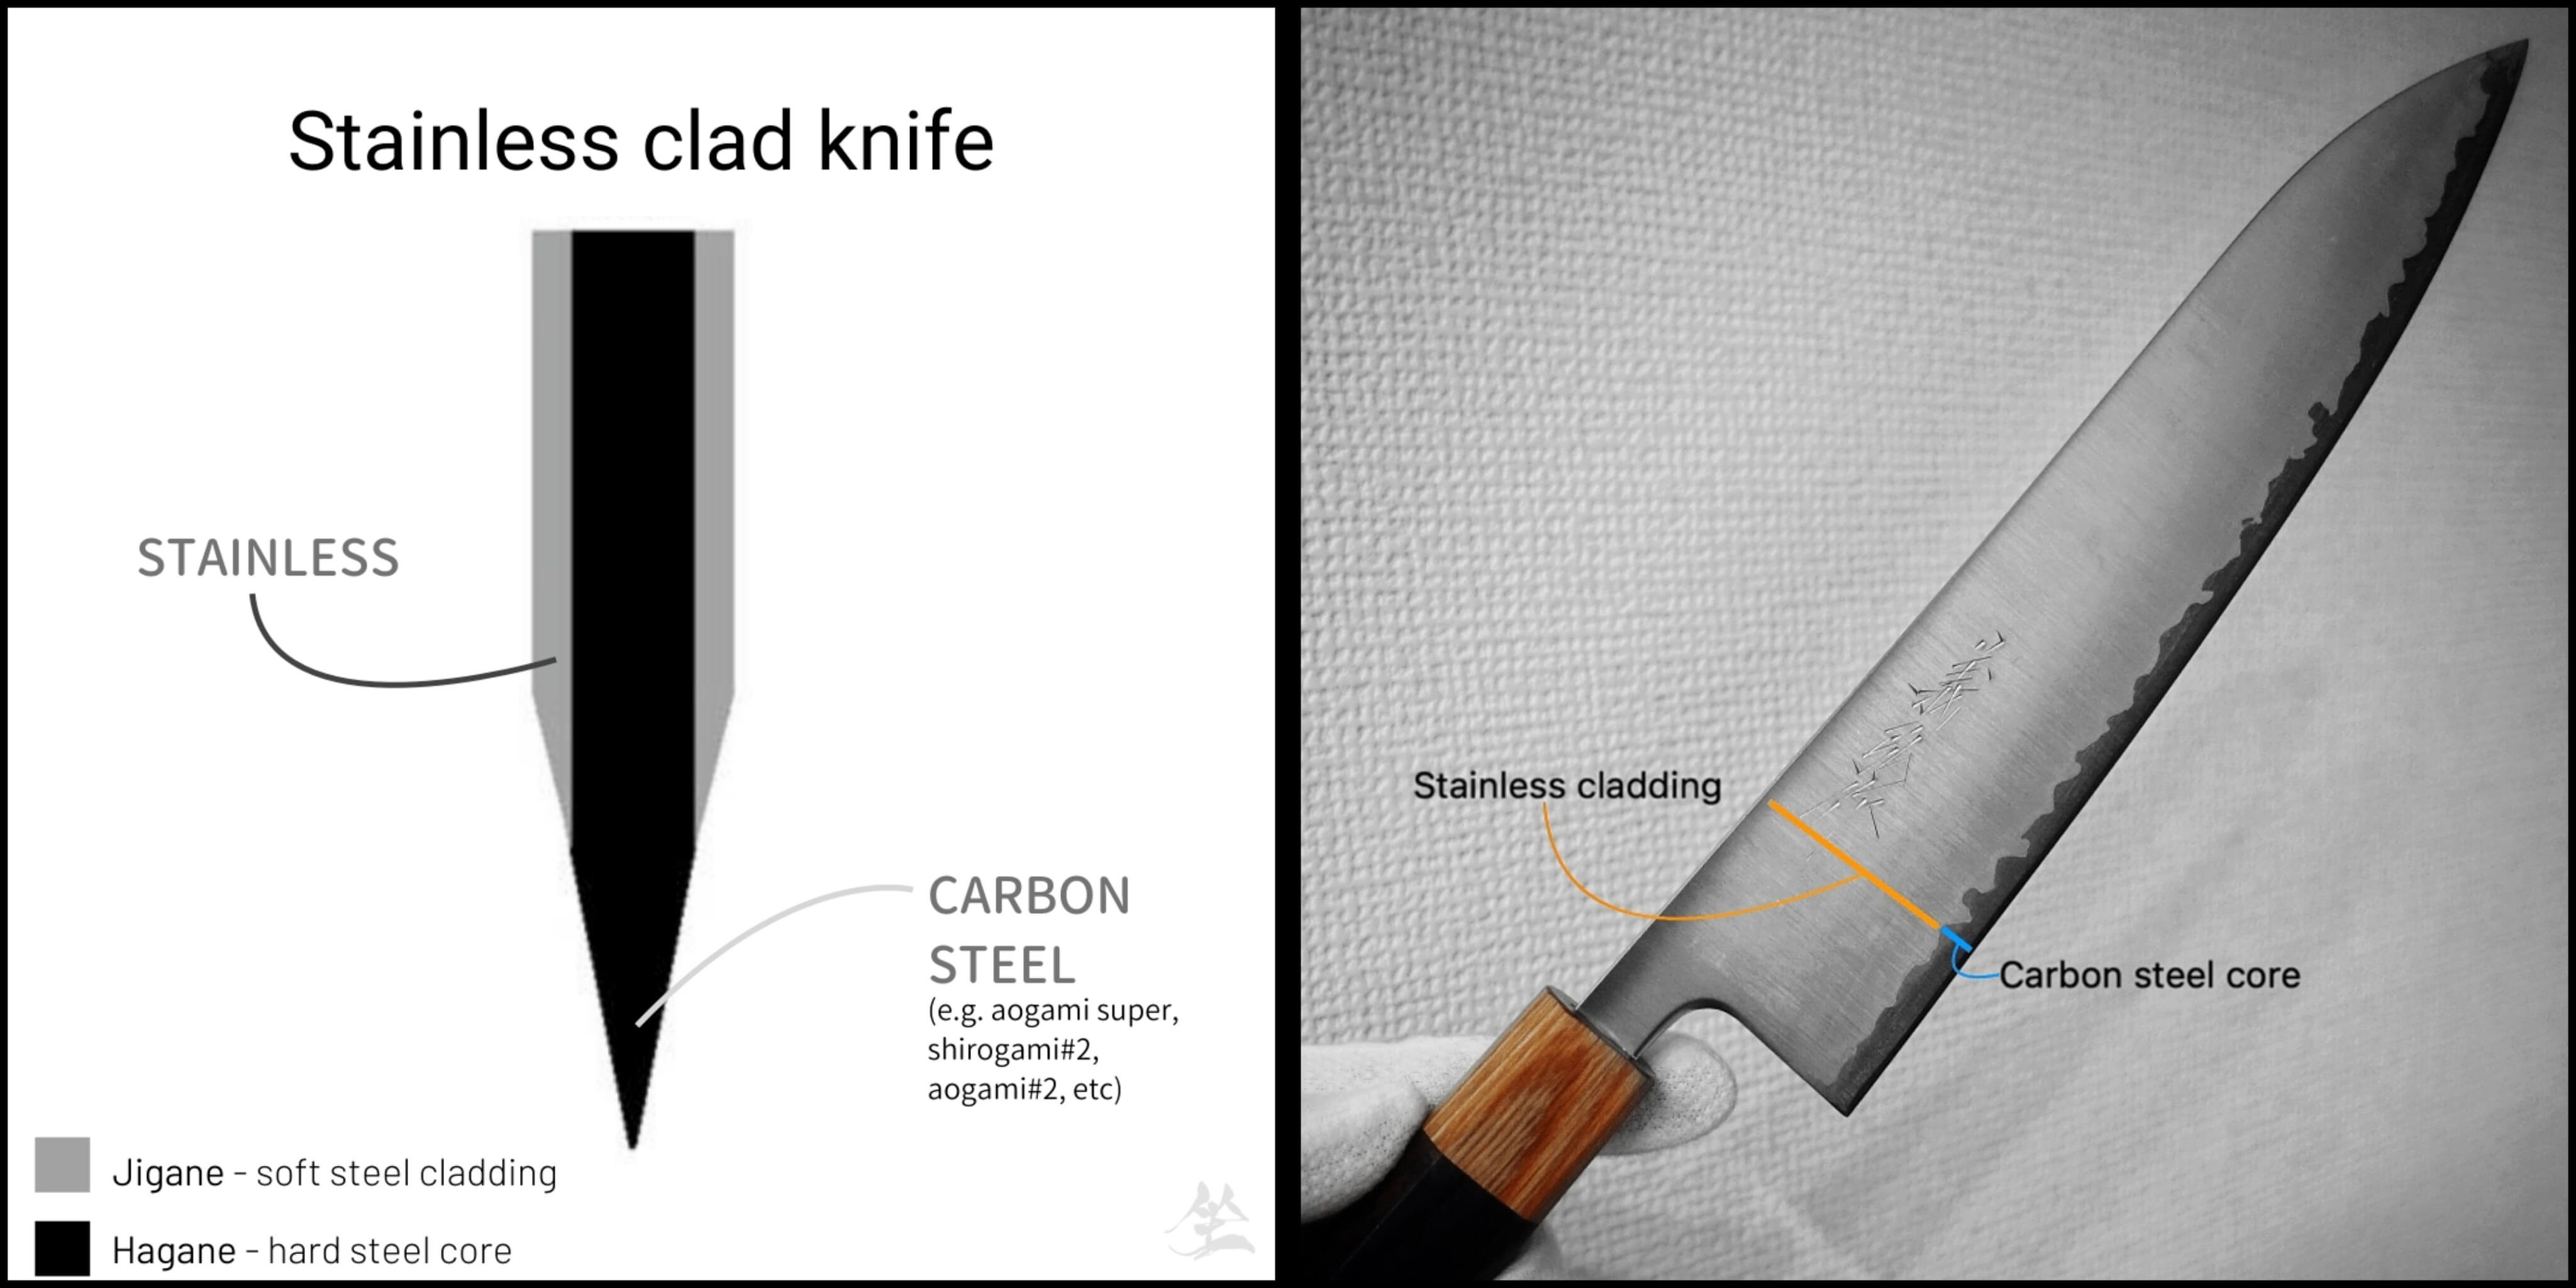 a diagram showing the cross-section of a stainless clad knife and a Yoshihiro aogami super gyuto with stainless clad